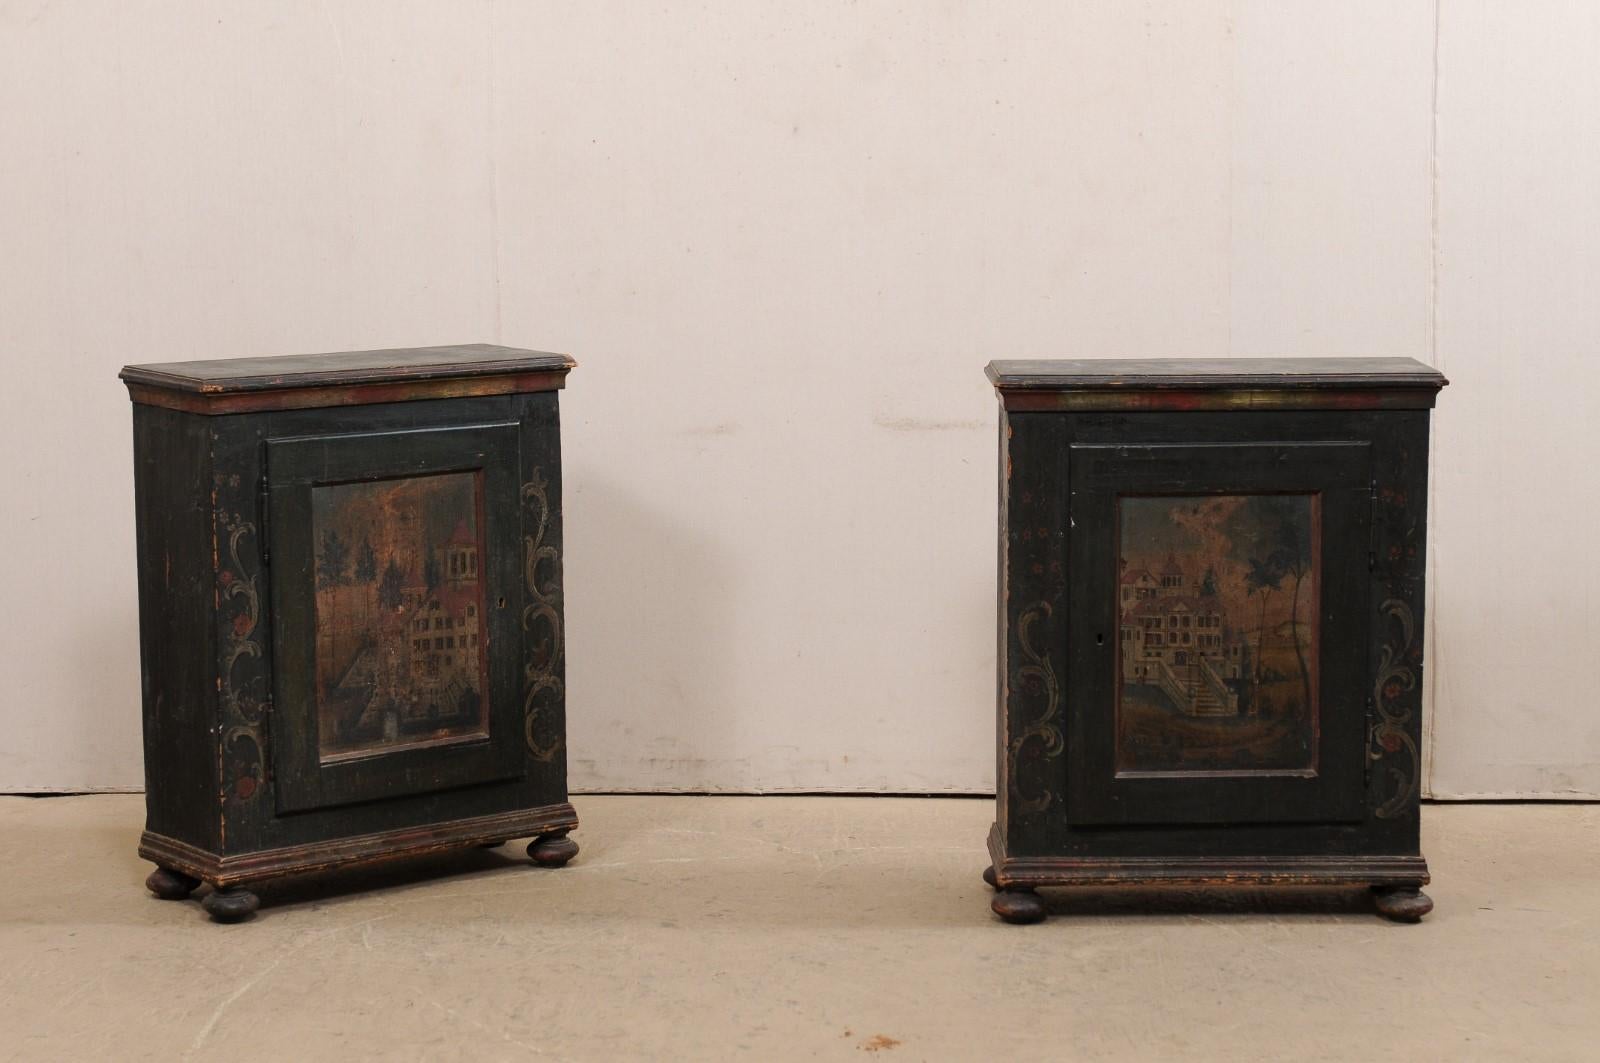 A pair of Central European single-door cabinets with their original artistic hand painted finish from the 19th century. This antique pair of cabinets from Europe each feature a rectangular-shaped top over a case fitted with a single door at front,